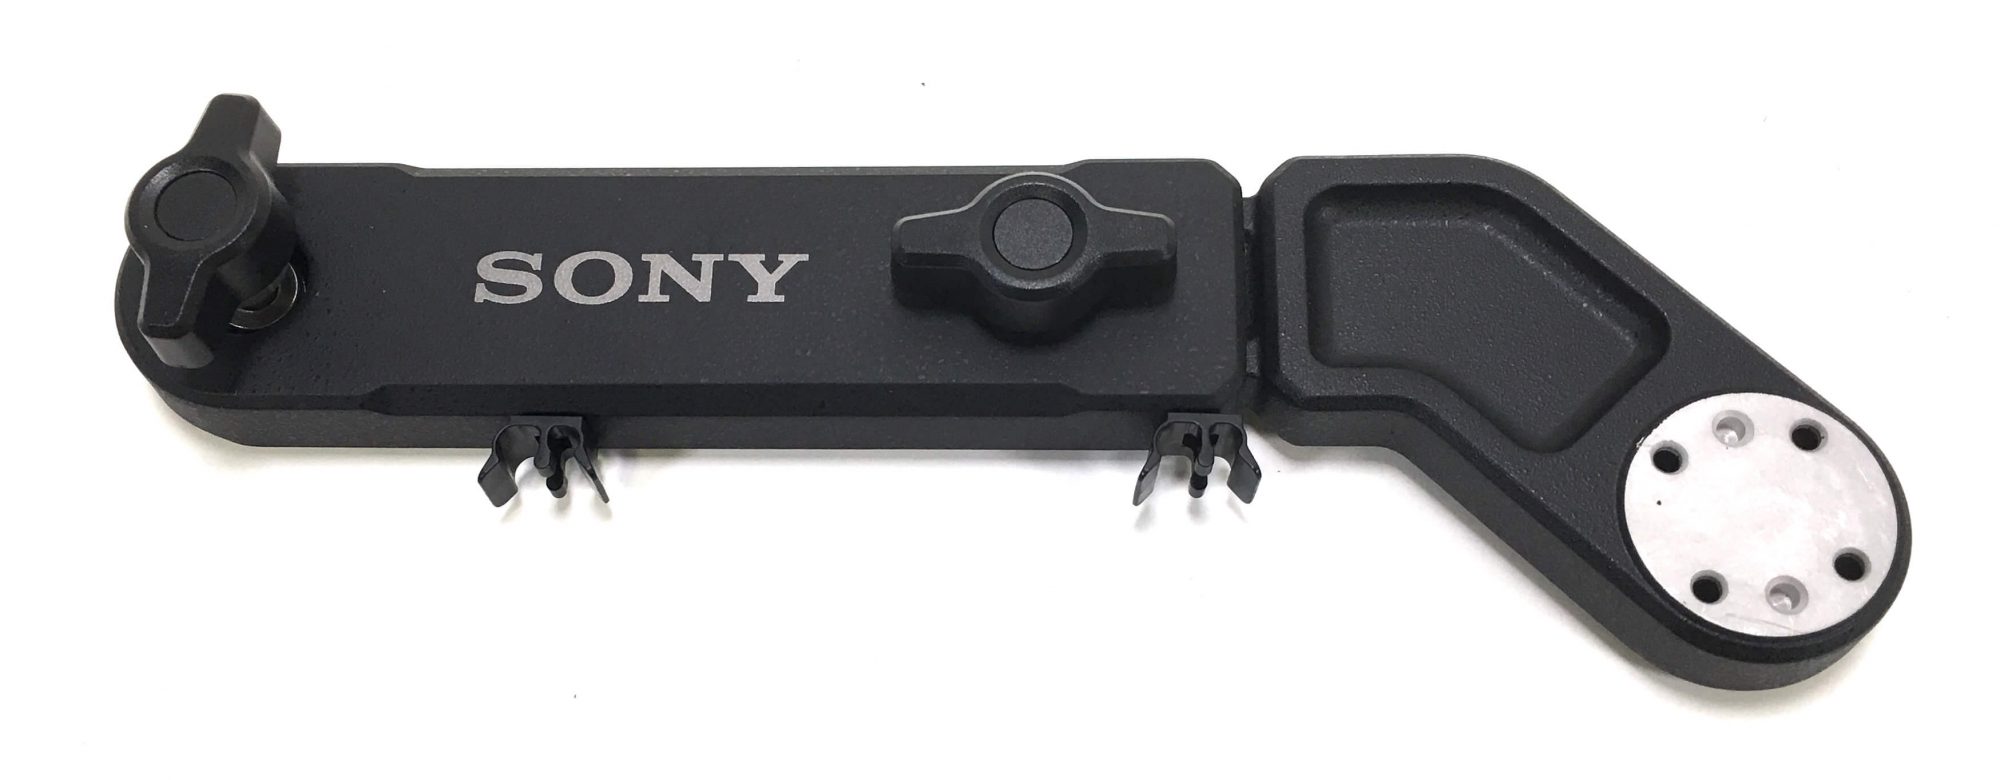 Original Grip Arm that fits on the Sony PXW-FS7M2 camcorder. It is a genuine Sony part, sourced directly from Sony USA. Brand new factory fresh. Free Shipping.